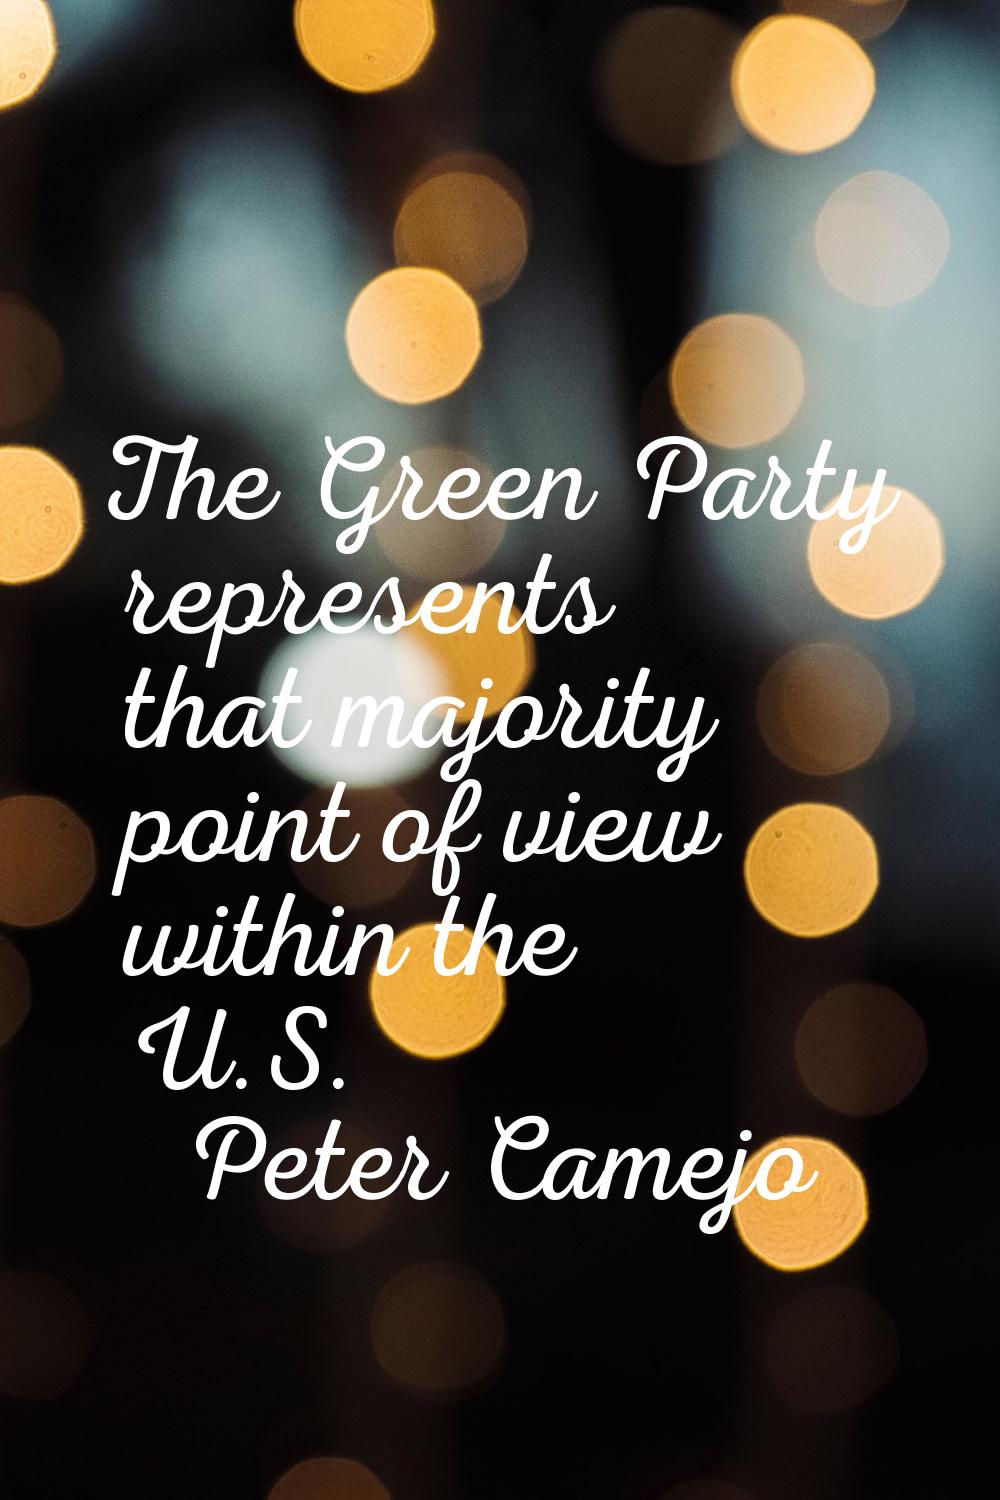 The Green Party represents that majority point of view within the U.S.